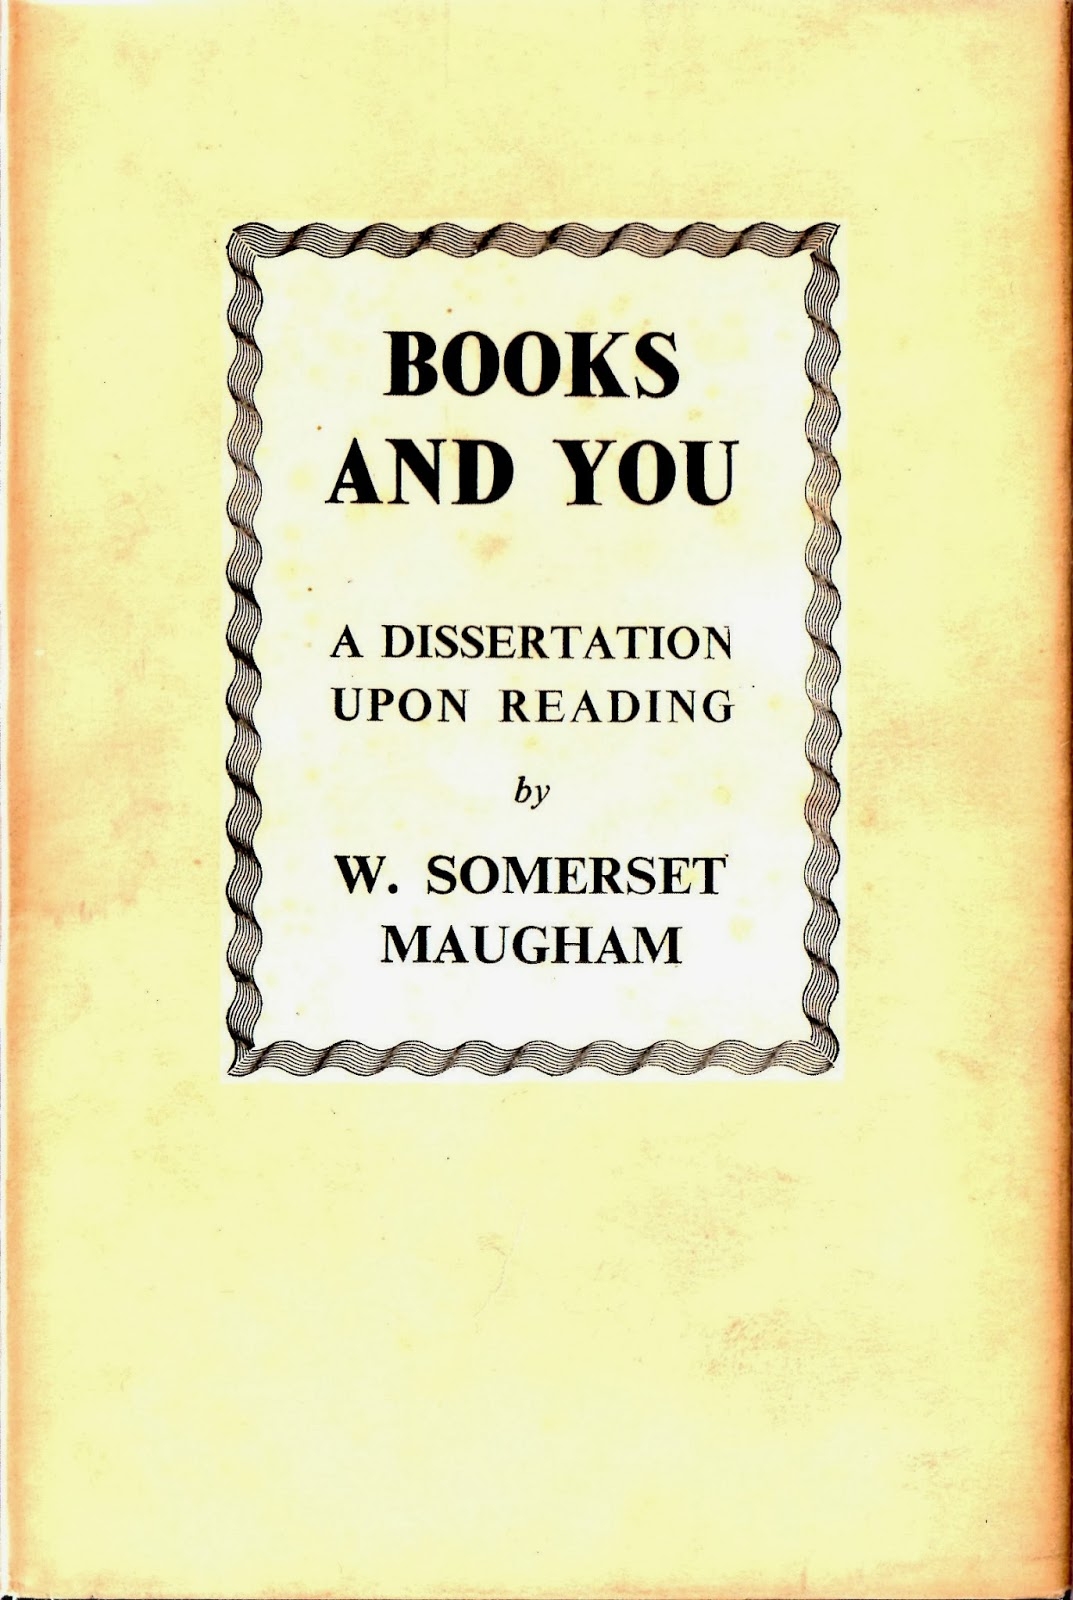 Book dissertation upon parties